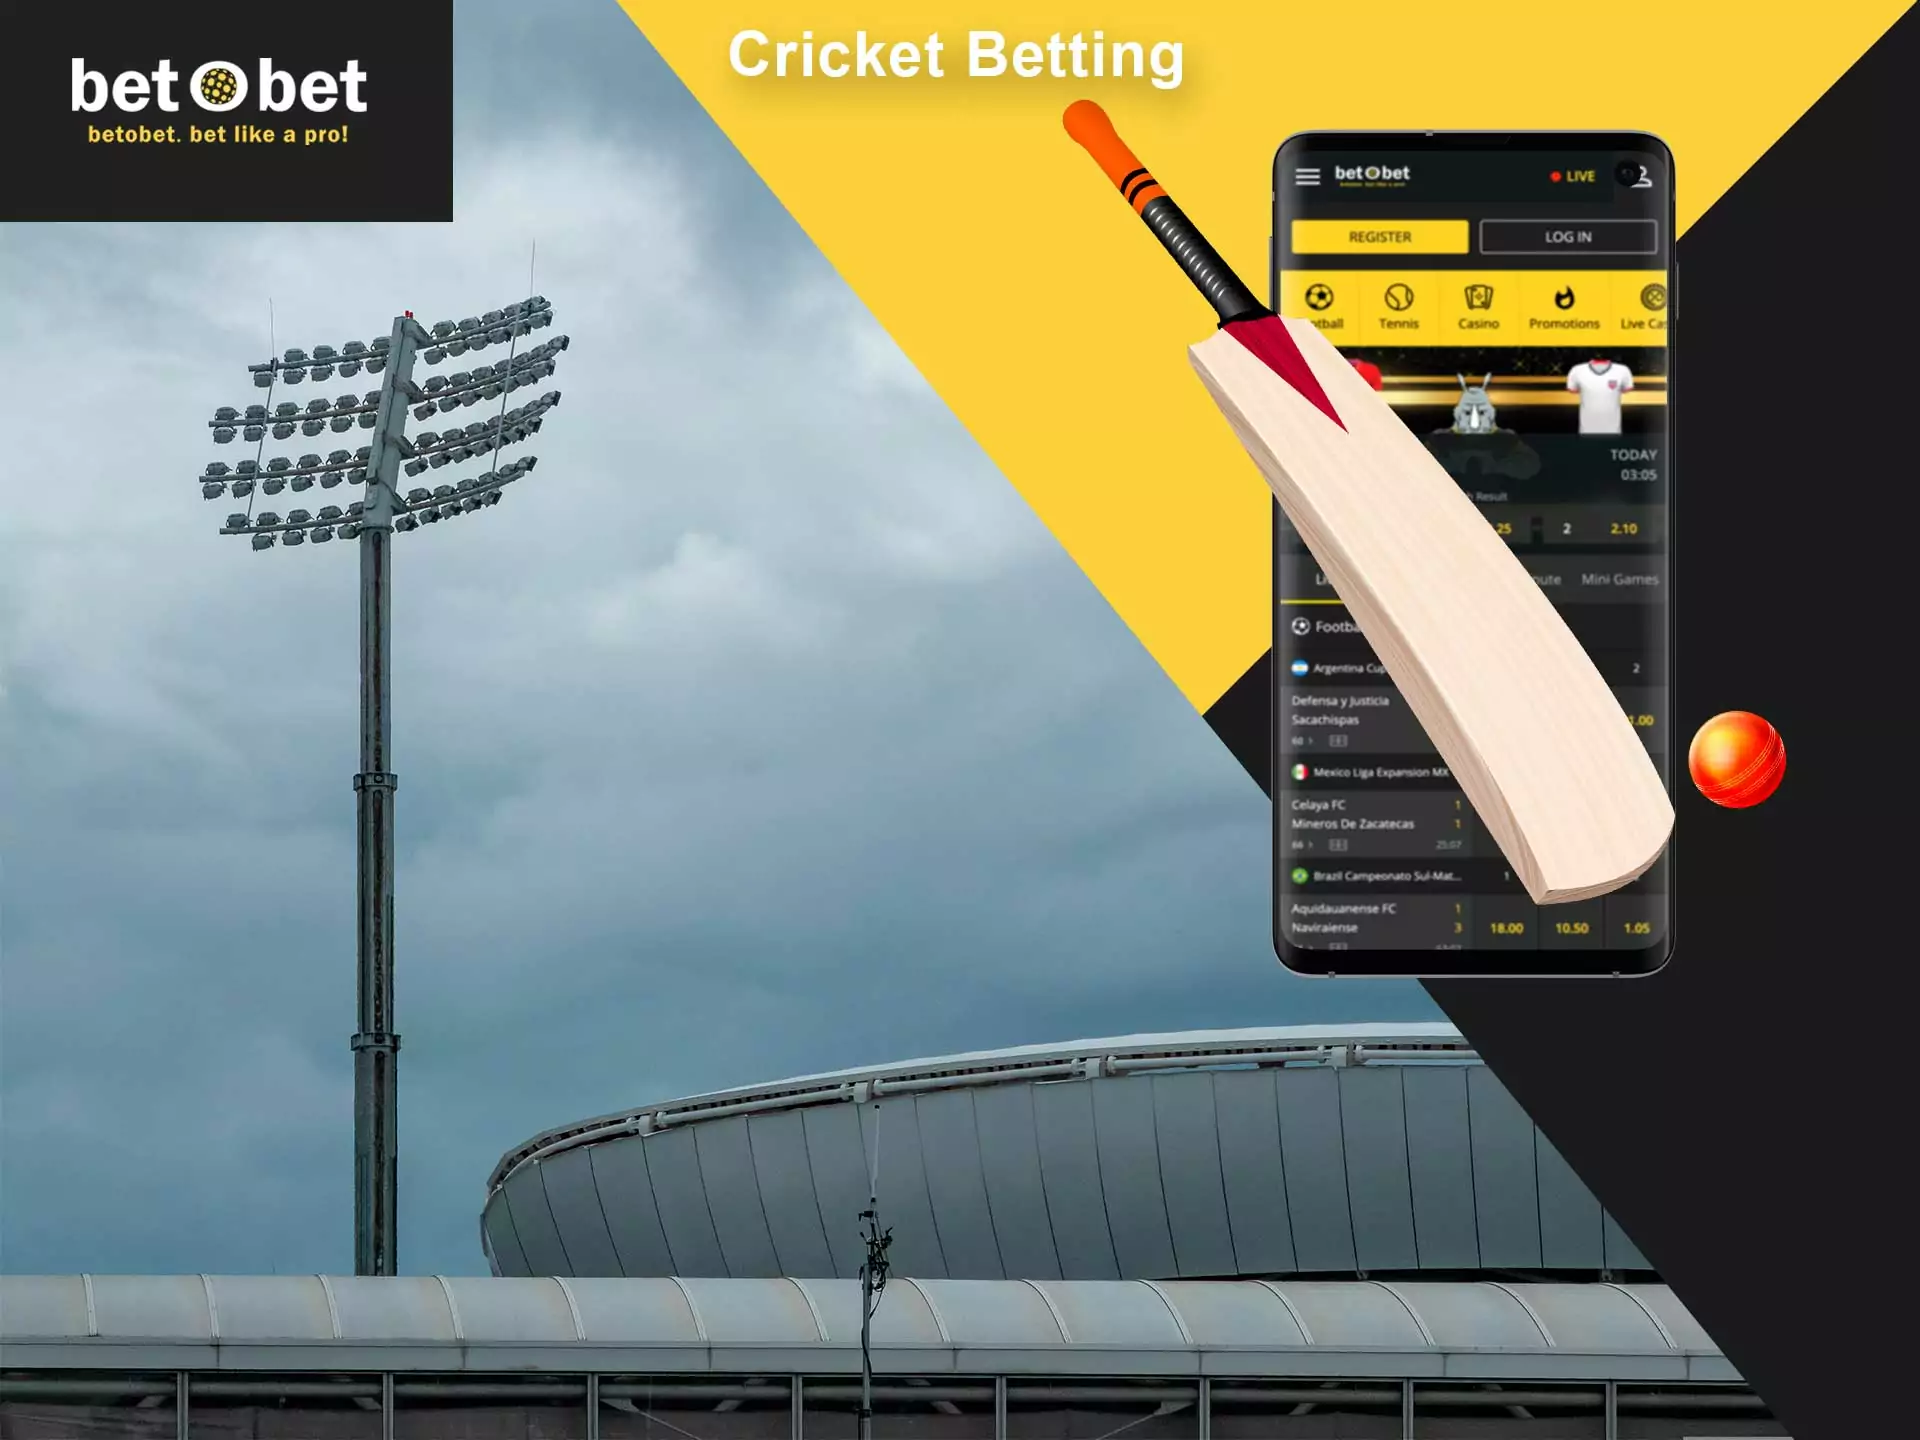 Betobet offers favorable odds for betting on cricket.